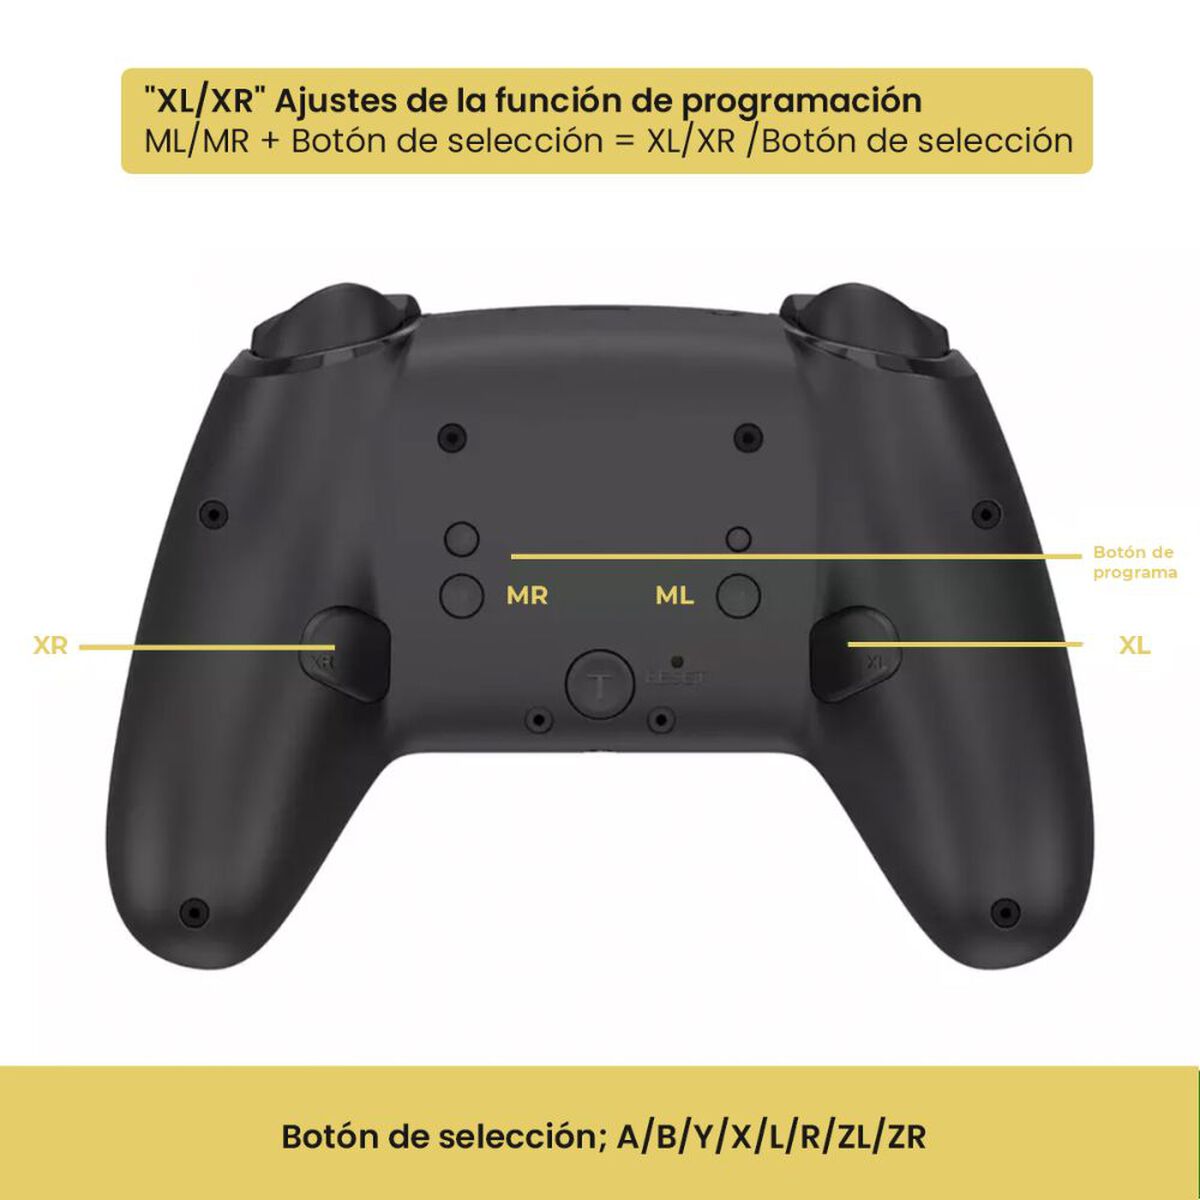 Control Gamer Levo Nintendo Switch, PC y Android